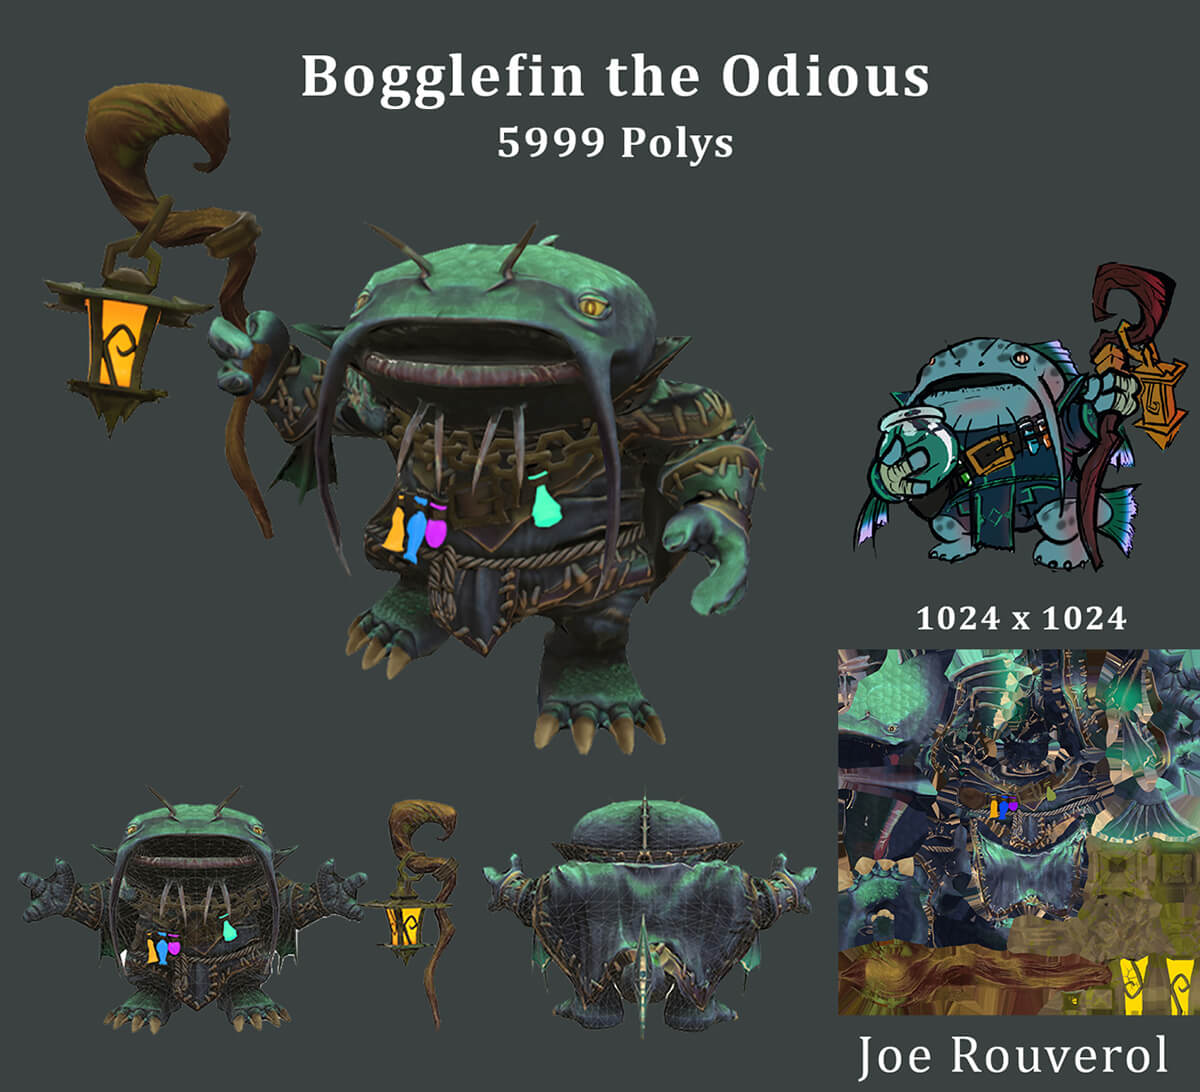 A model sheet of Joe Rouverol’s catfish wizard character Bogglefin the Odious.